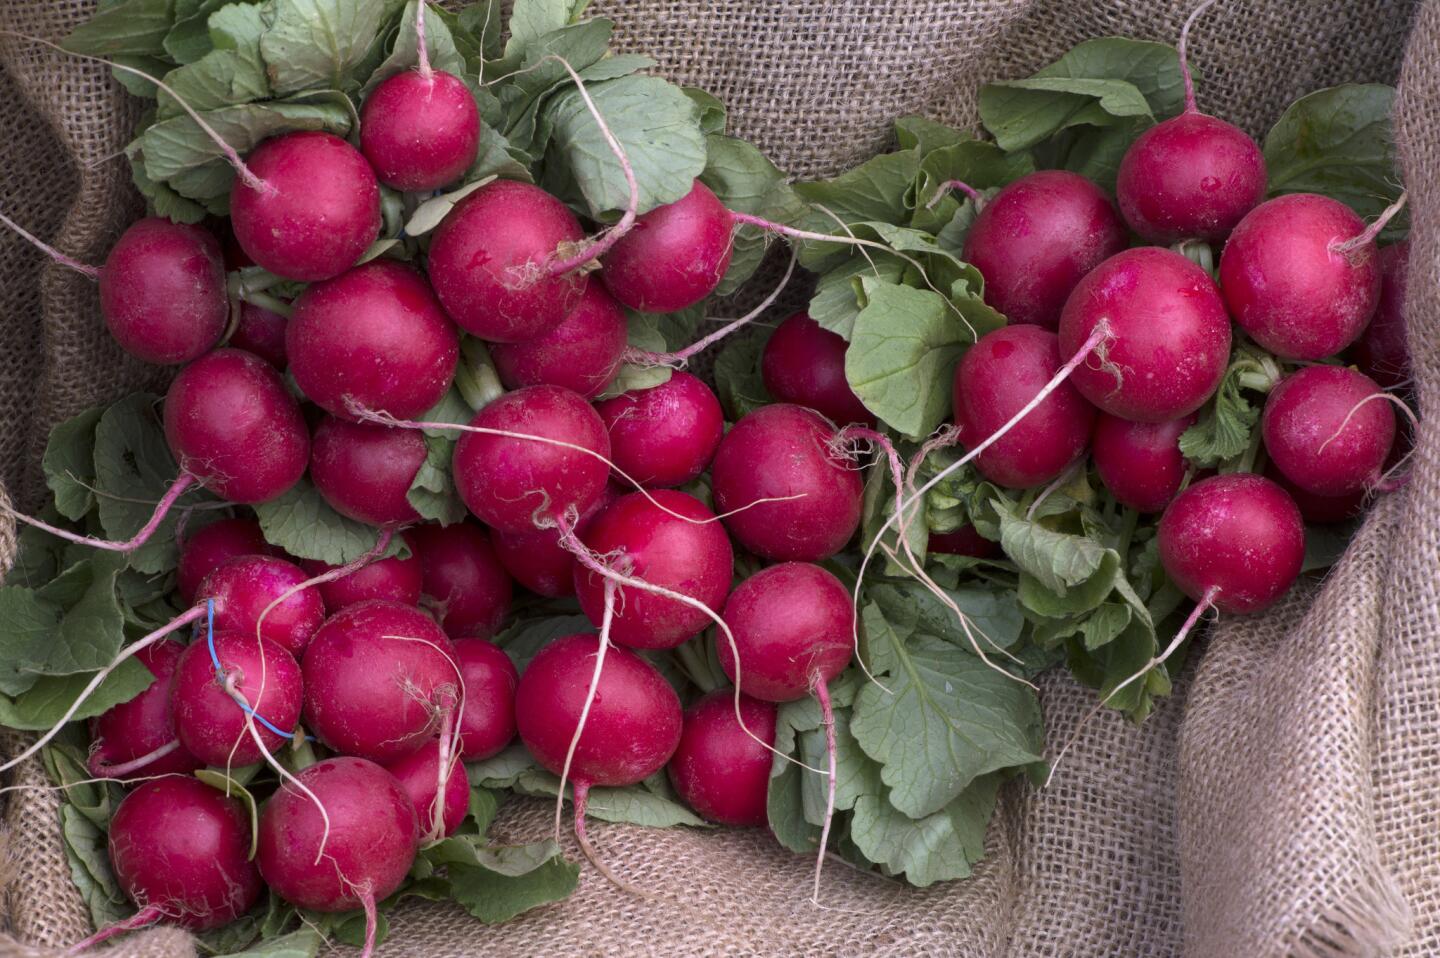 Radishes for sale at Larchmont farmers market